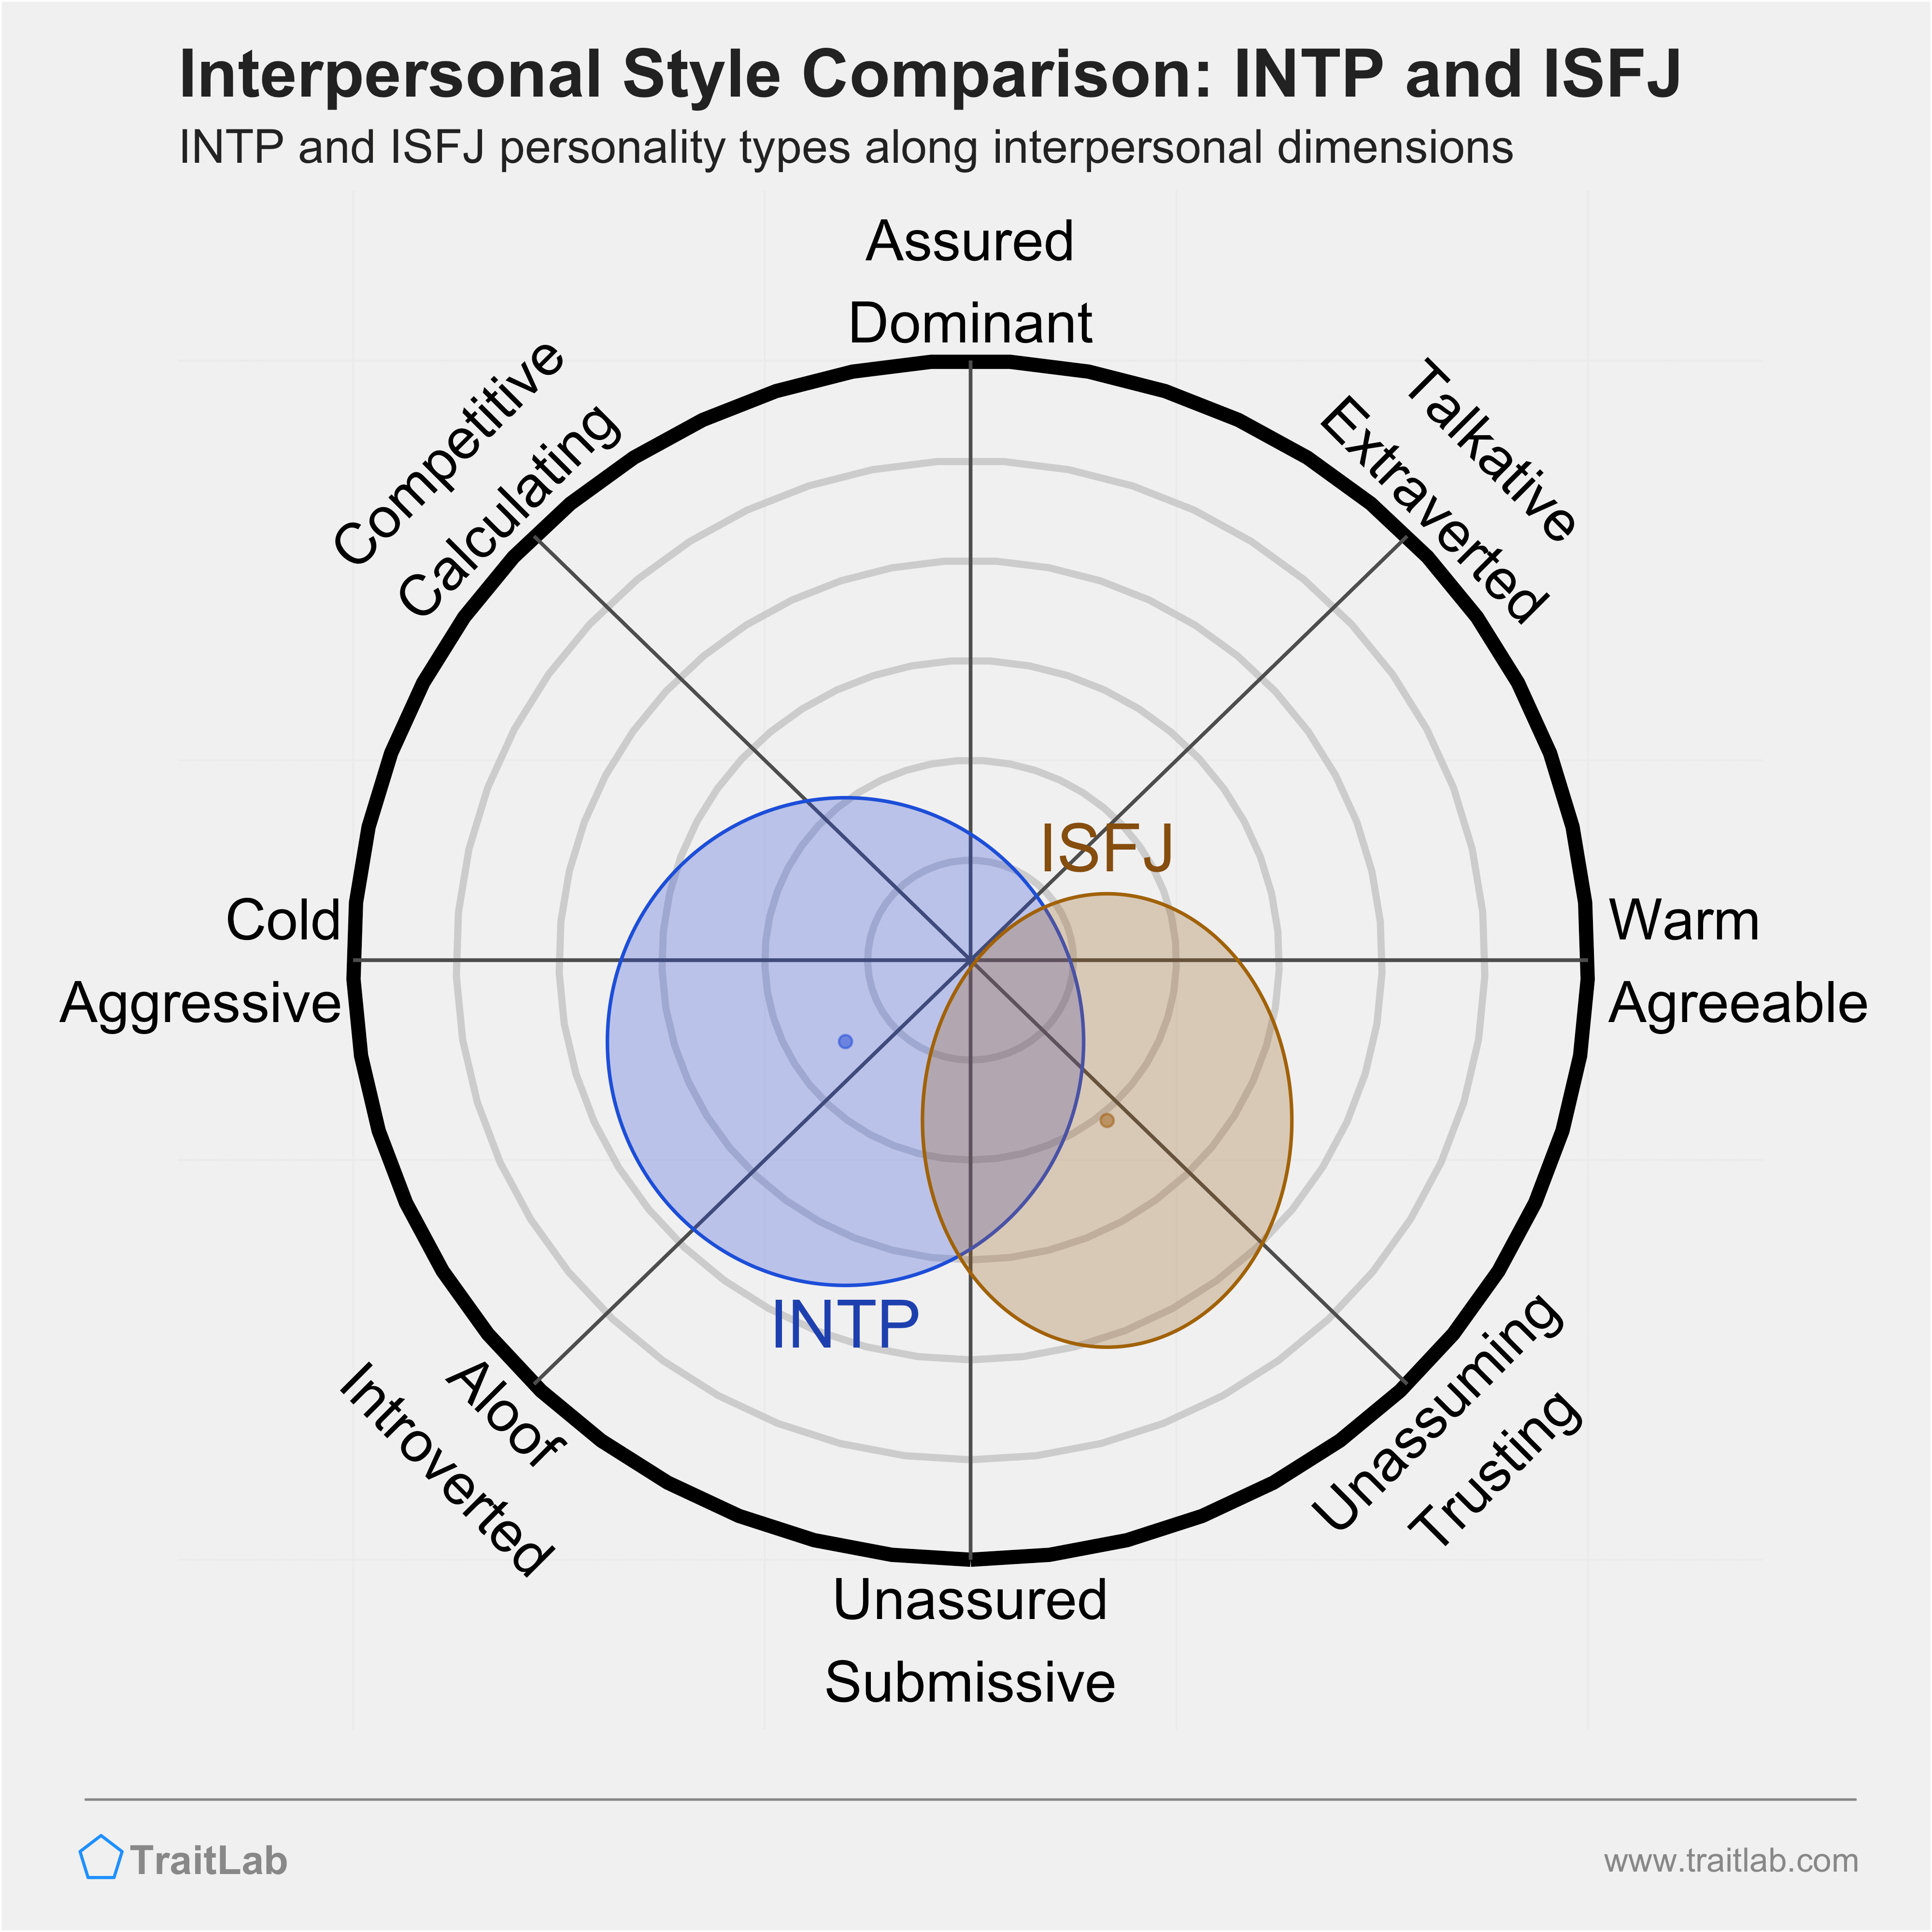 INTP and ISFJ comparison across interpersonal dimensions